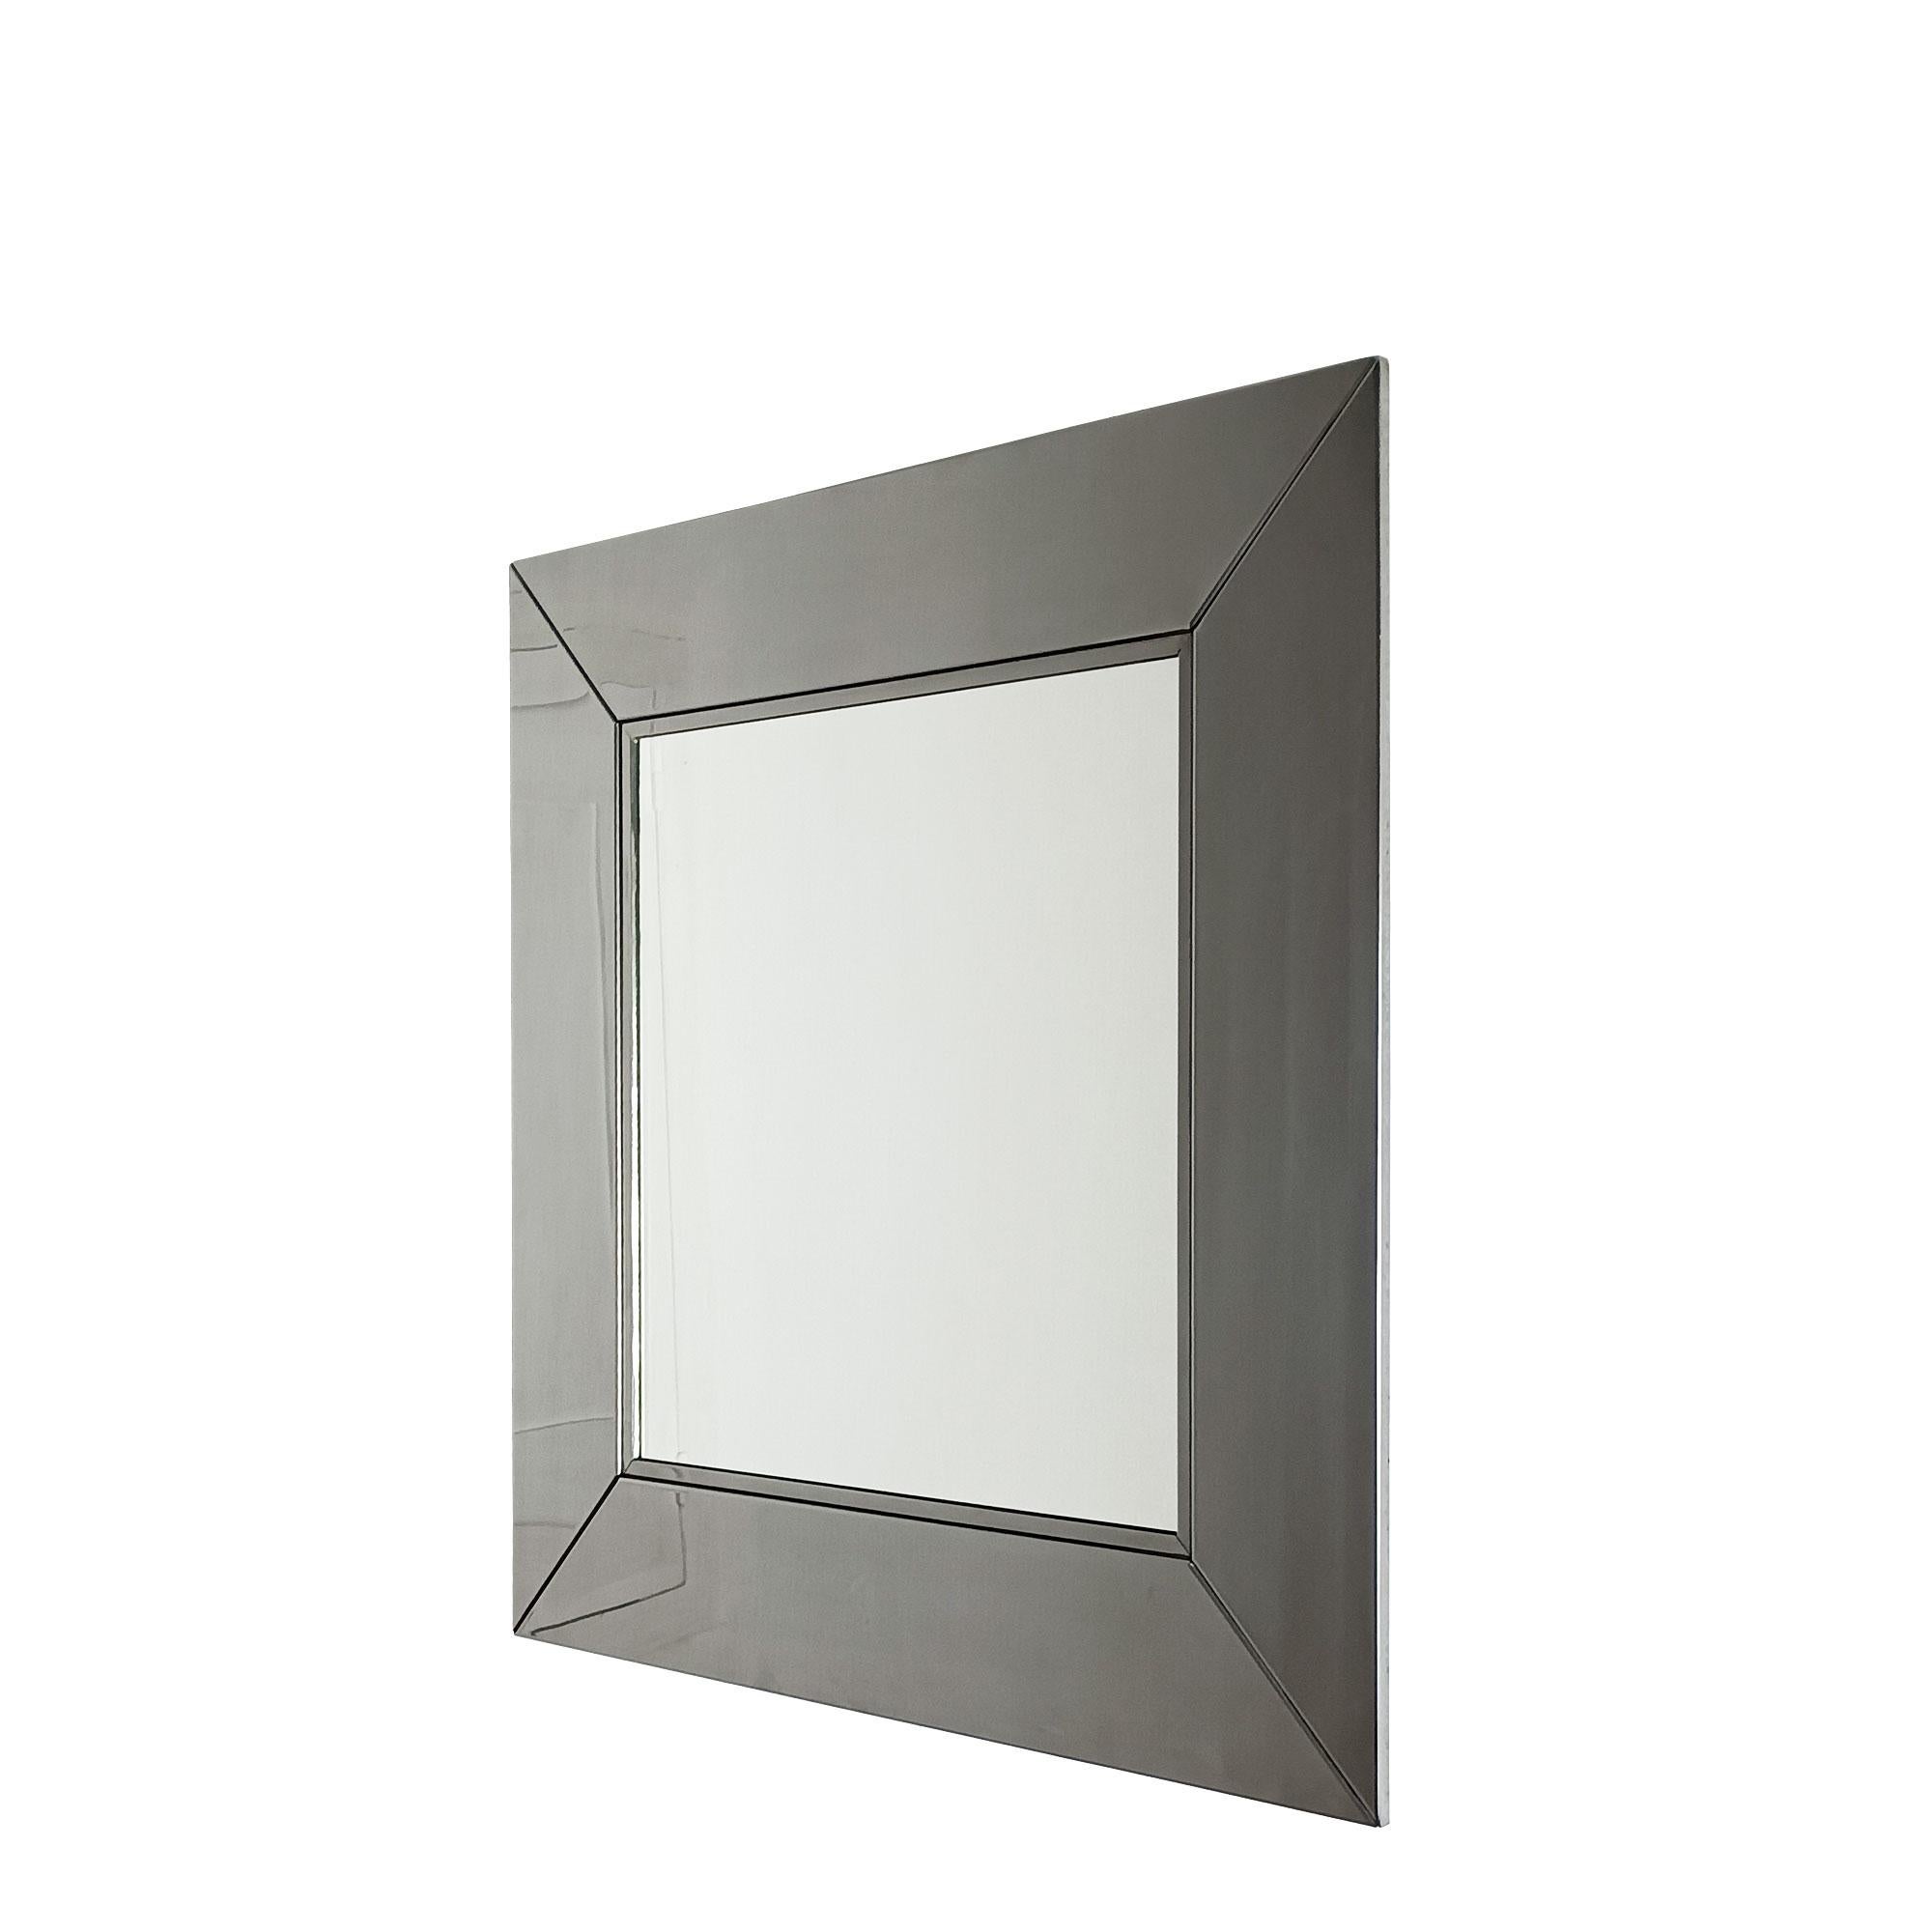 Mirror with chrome-plated metal frame. Very high quality.
Design by Giorgio Cattelan for Cidue.
Italy circa 1970